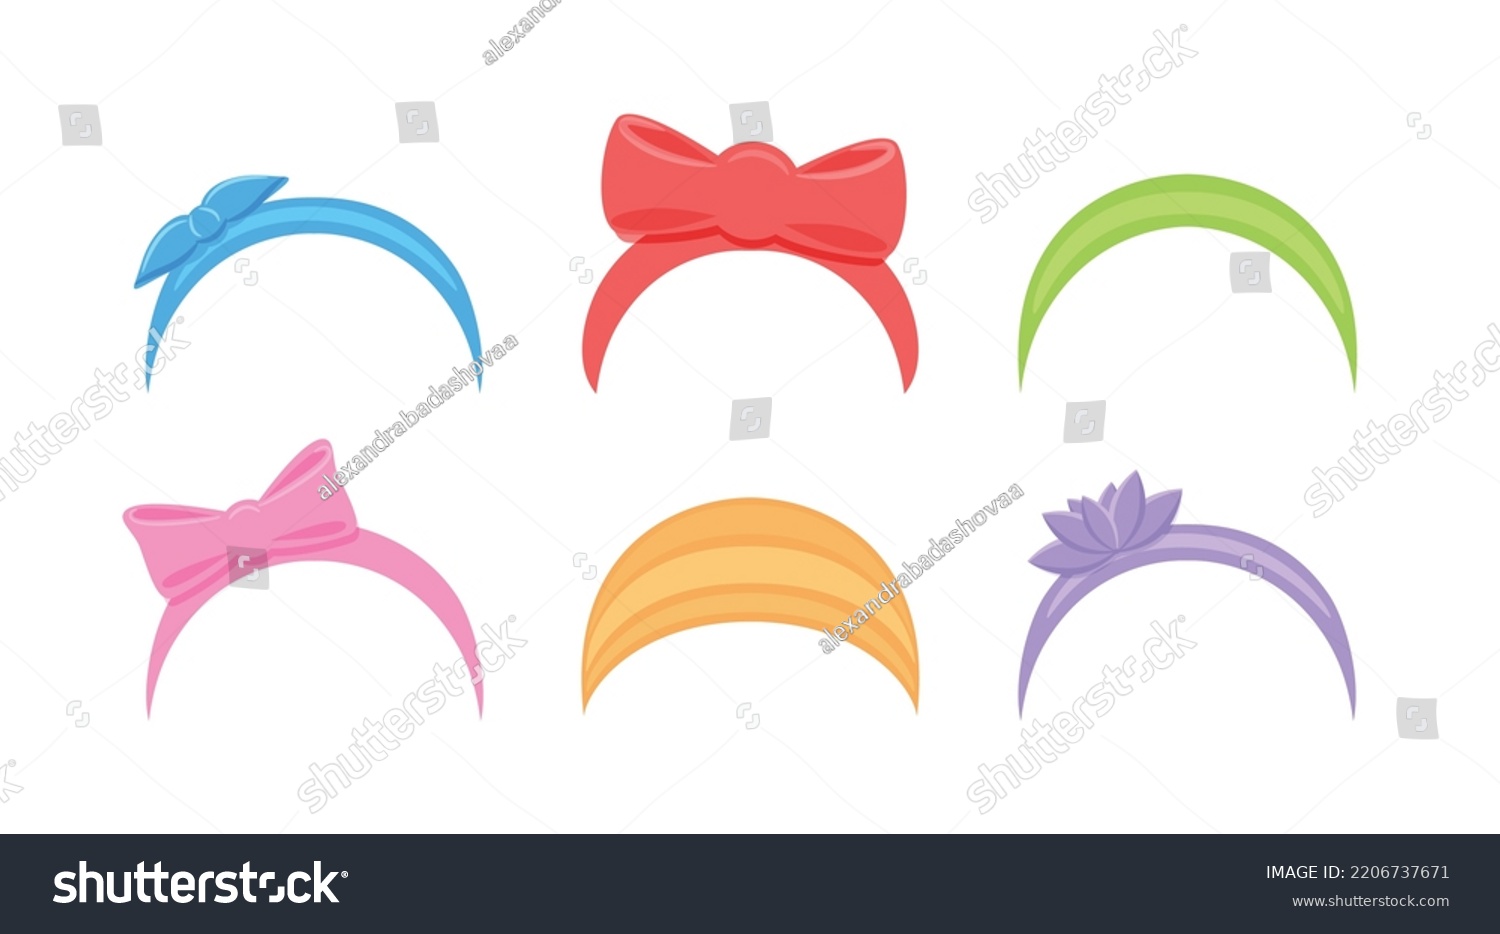 SVG of Beautiful Headbands. Set. Cute Female Hair Accessory. Headband with Bow and Flower for Young Woman and Little Girl. Color Fashion Cartoon style. White background. Vector illustration. svg